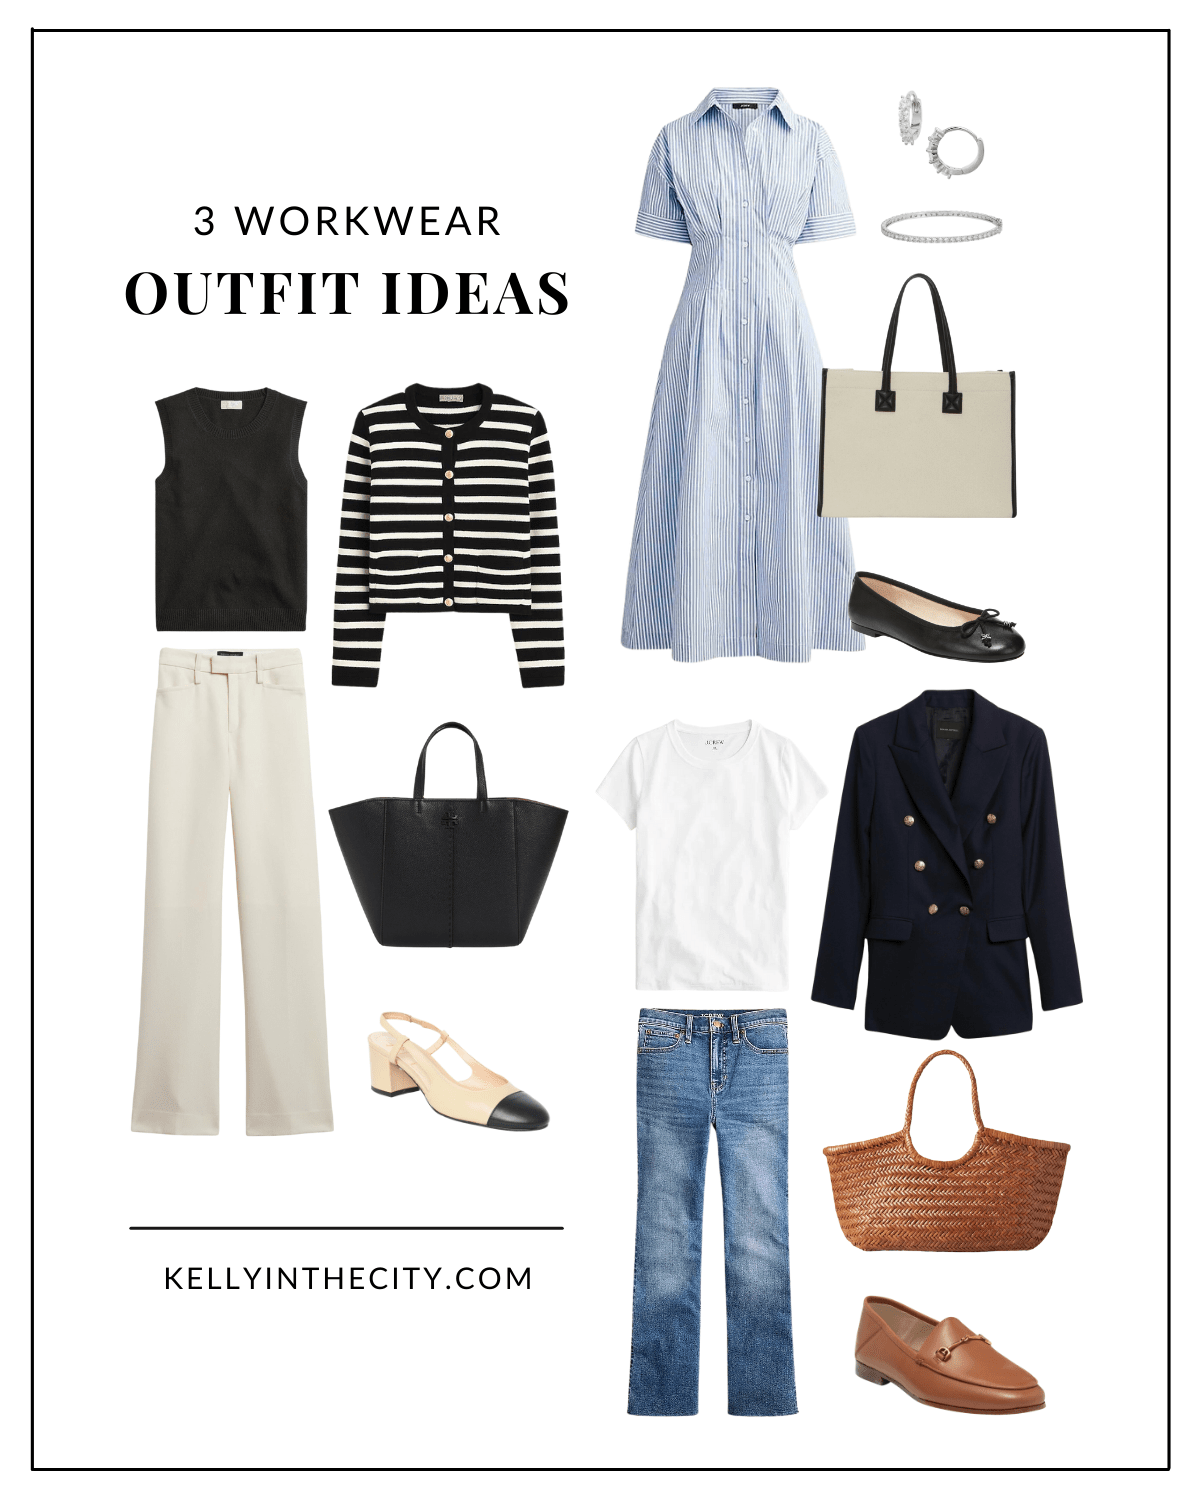 workwear outfit ideas